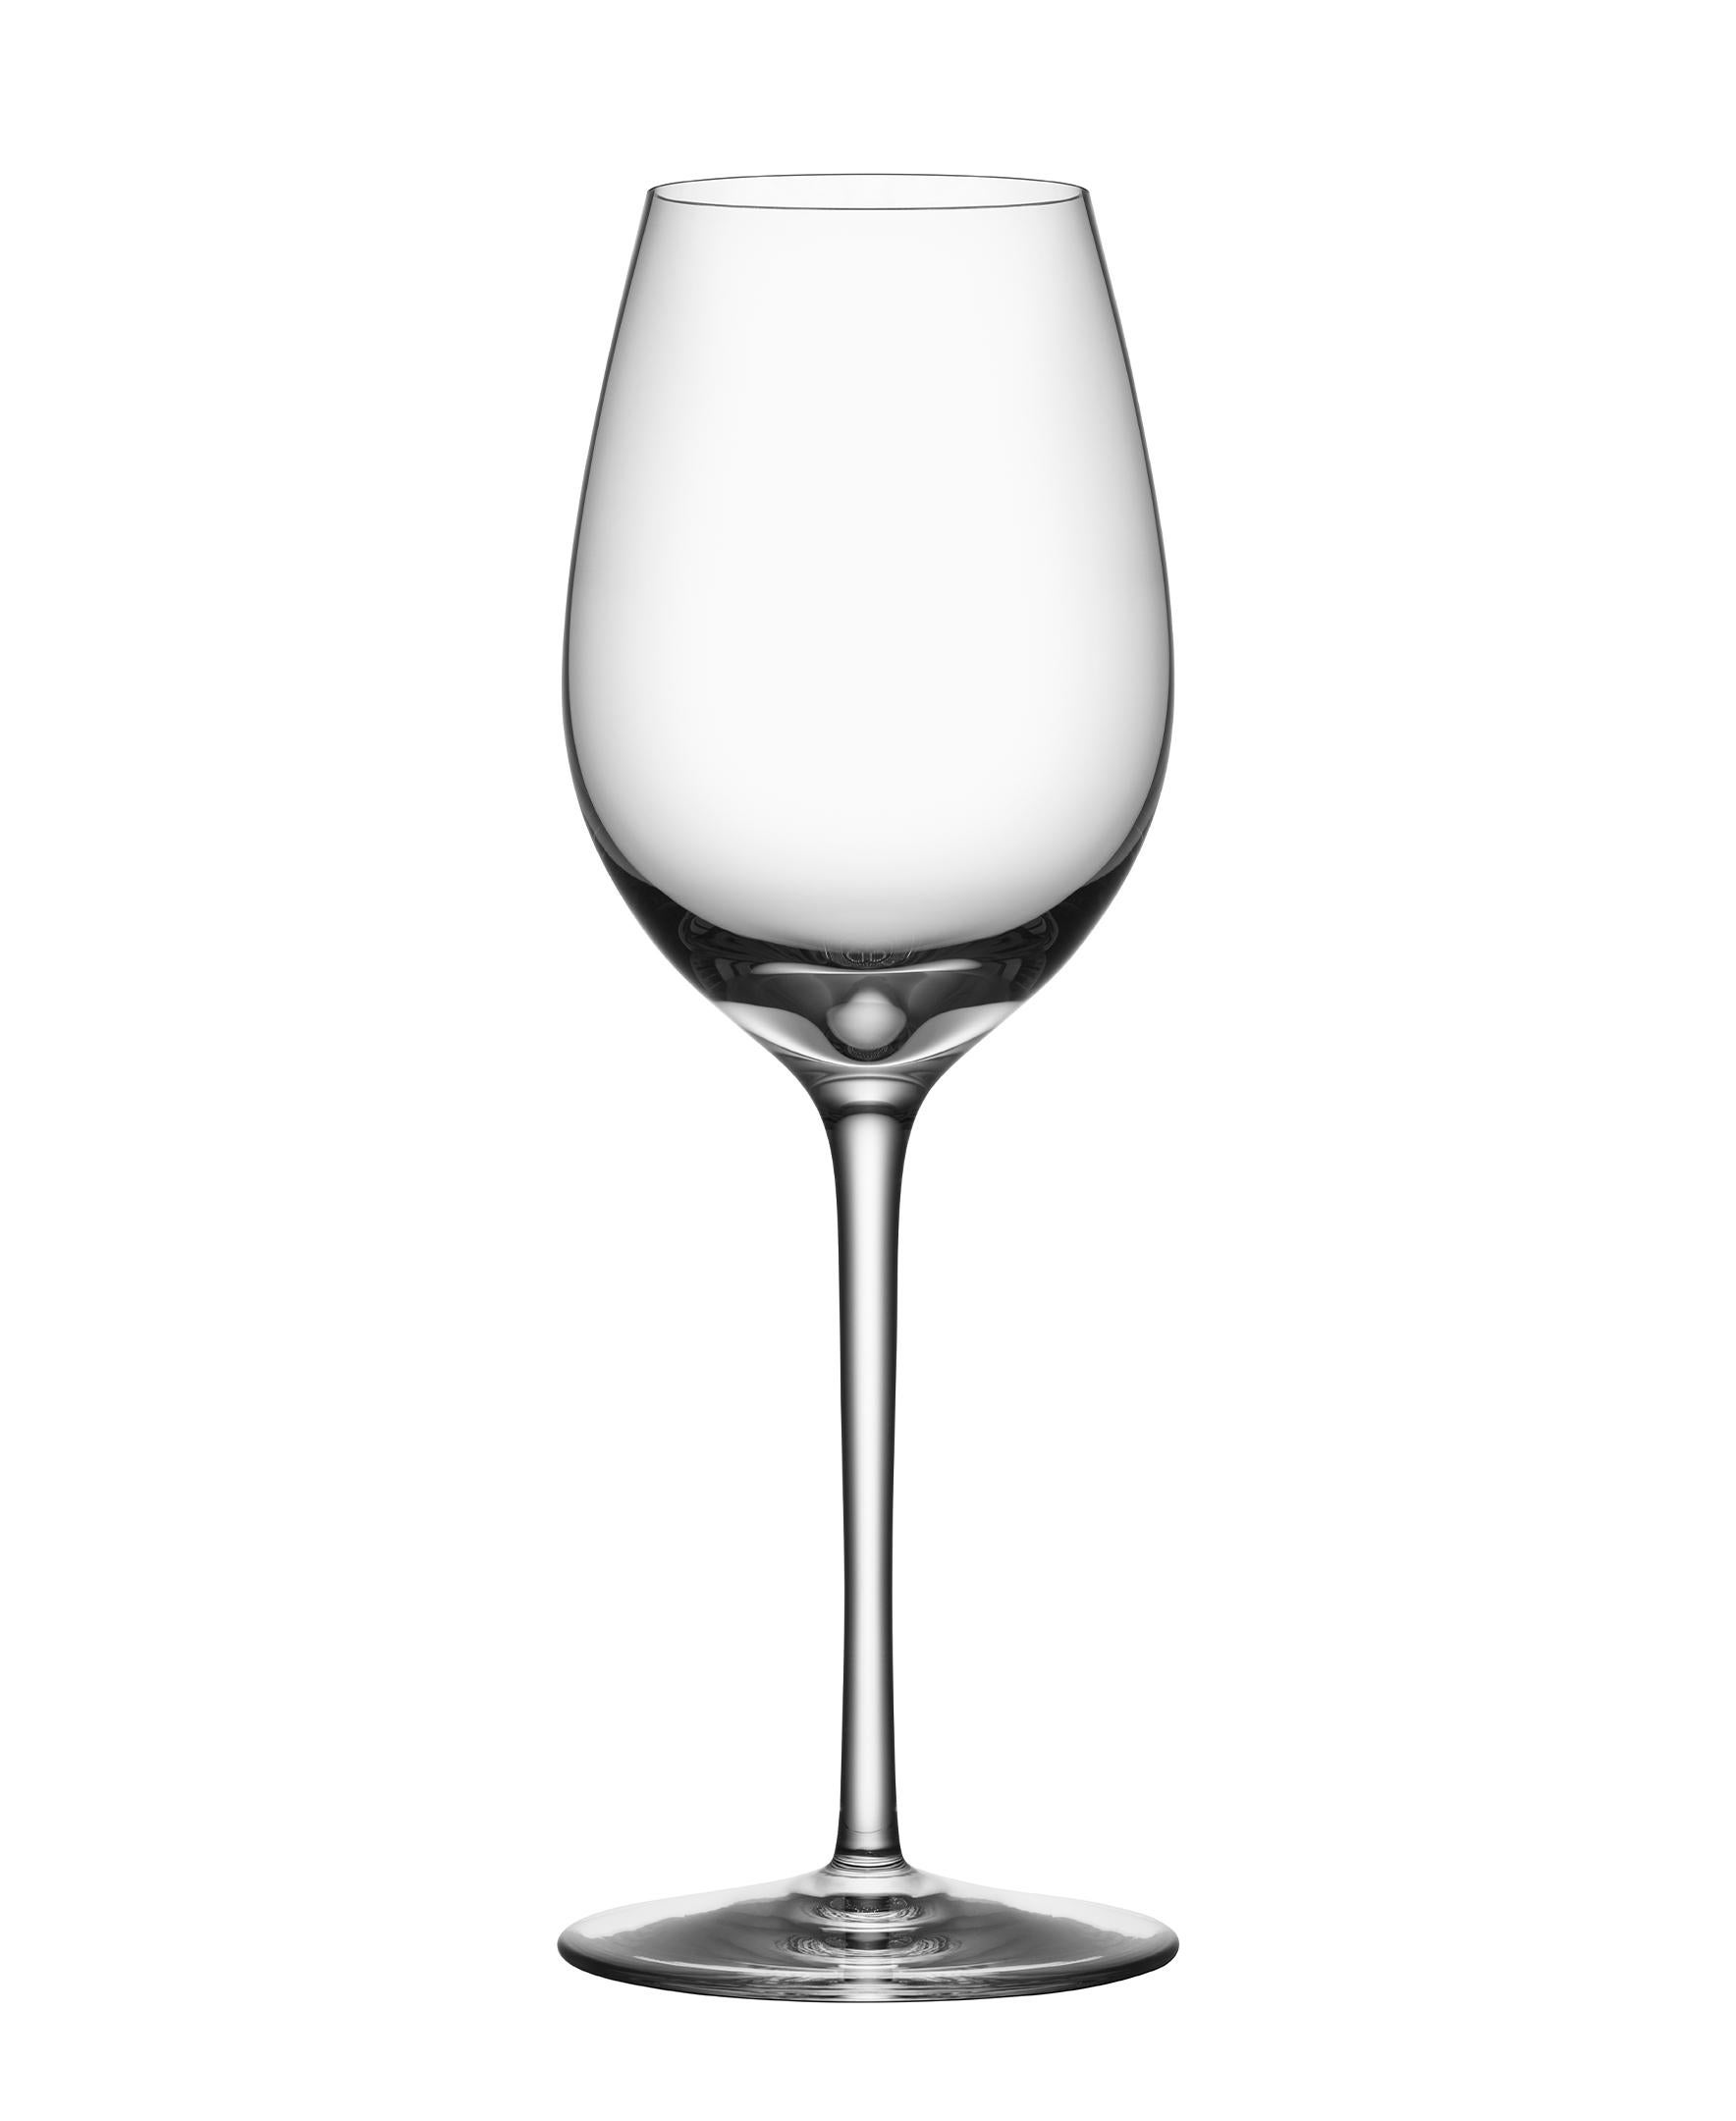 Premier Chardonnay from Orrefors, which holds 10 oz, is designed to emphasize the flavors and aromas of varietal wines, specifically Chardonnay. The wine glass is mouth-blown with a handmade stem and is an elegant complement to any table setting.
